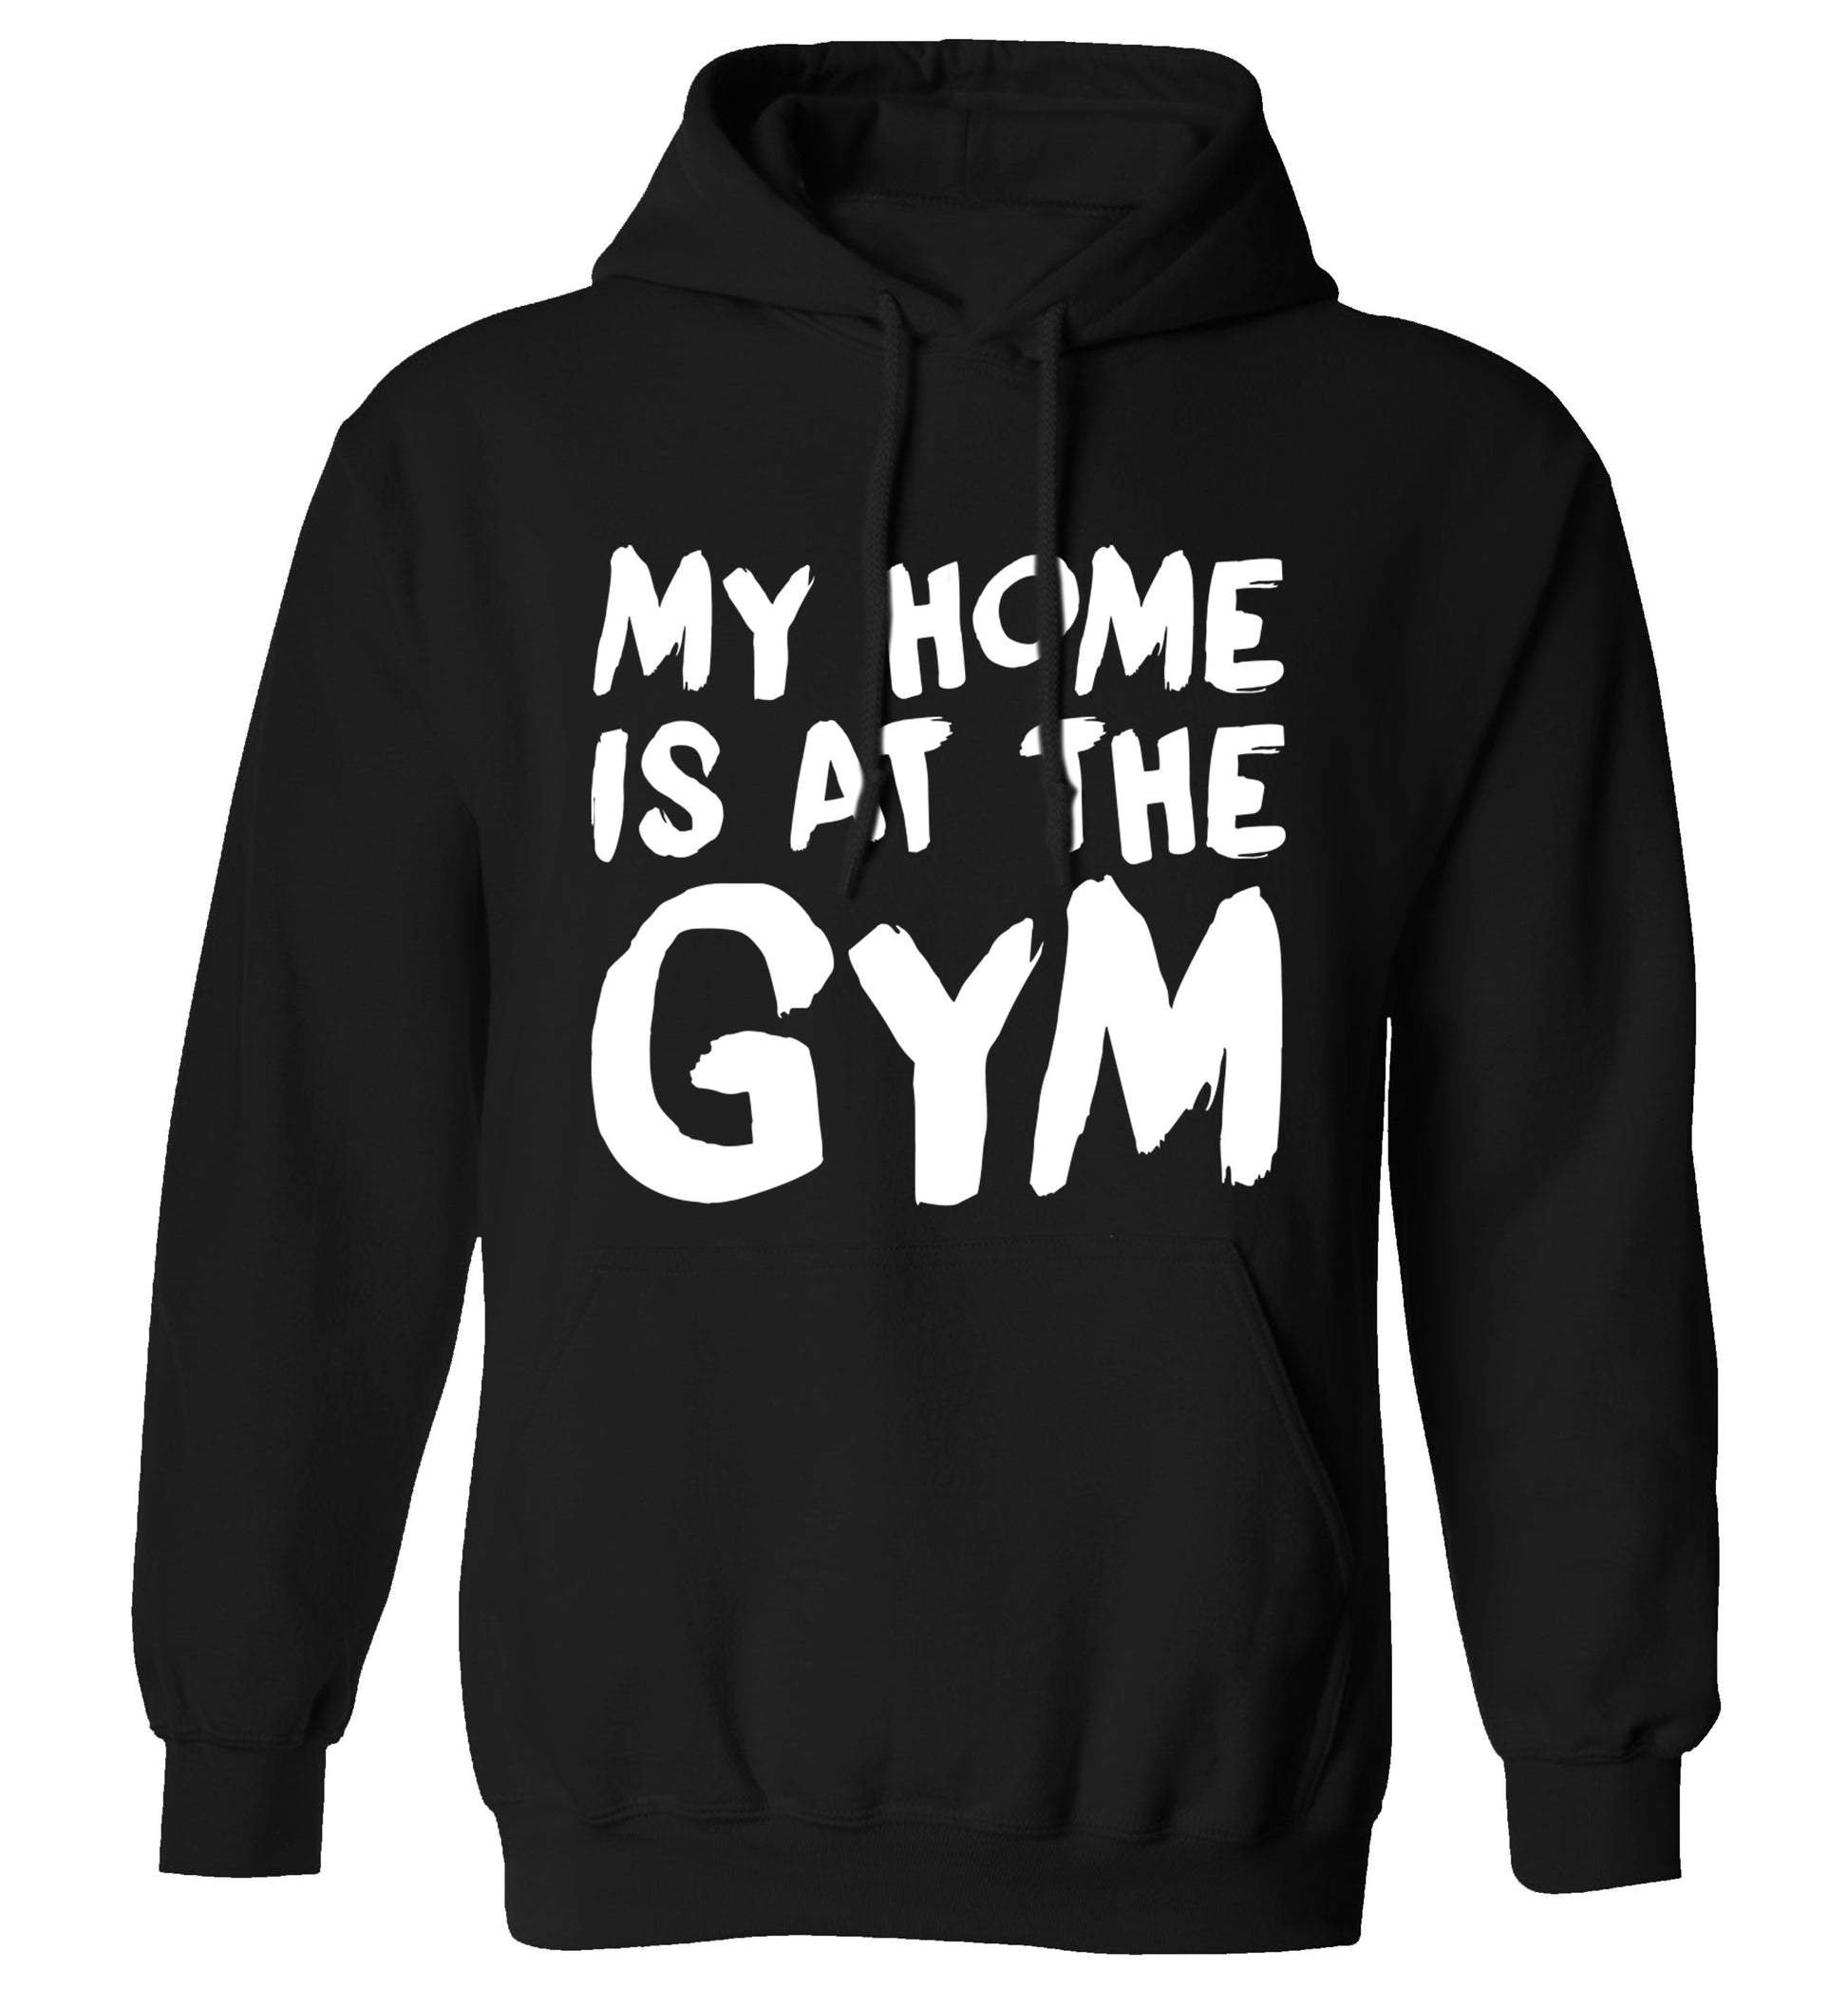 My home is at the gym adults unisex black hoodie 2XL